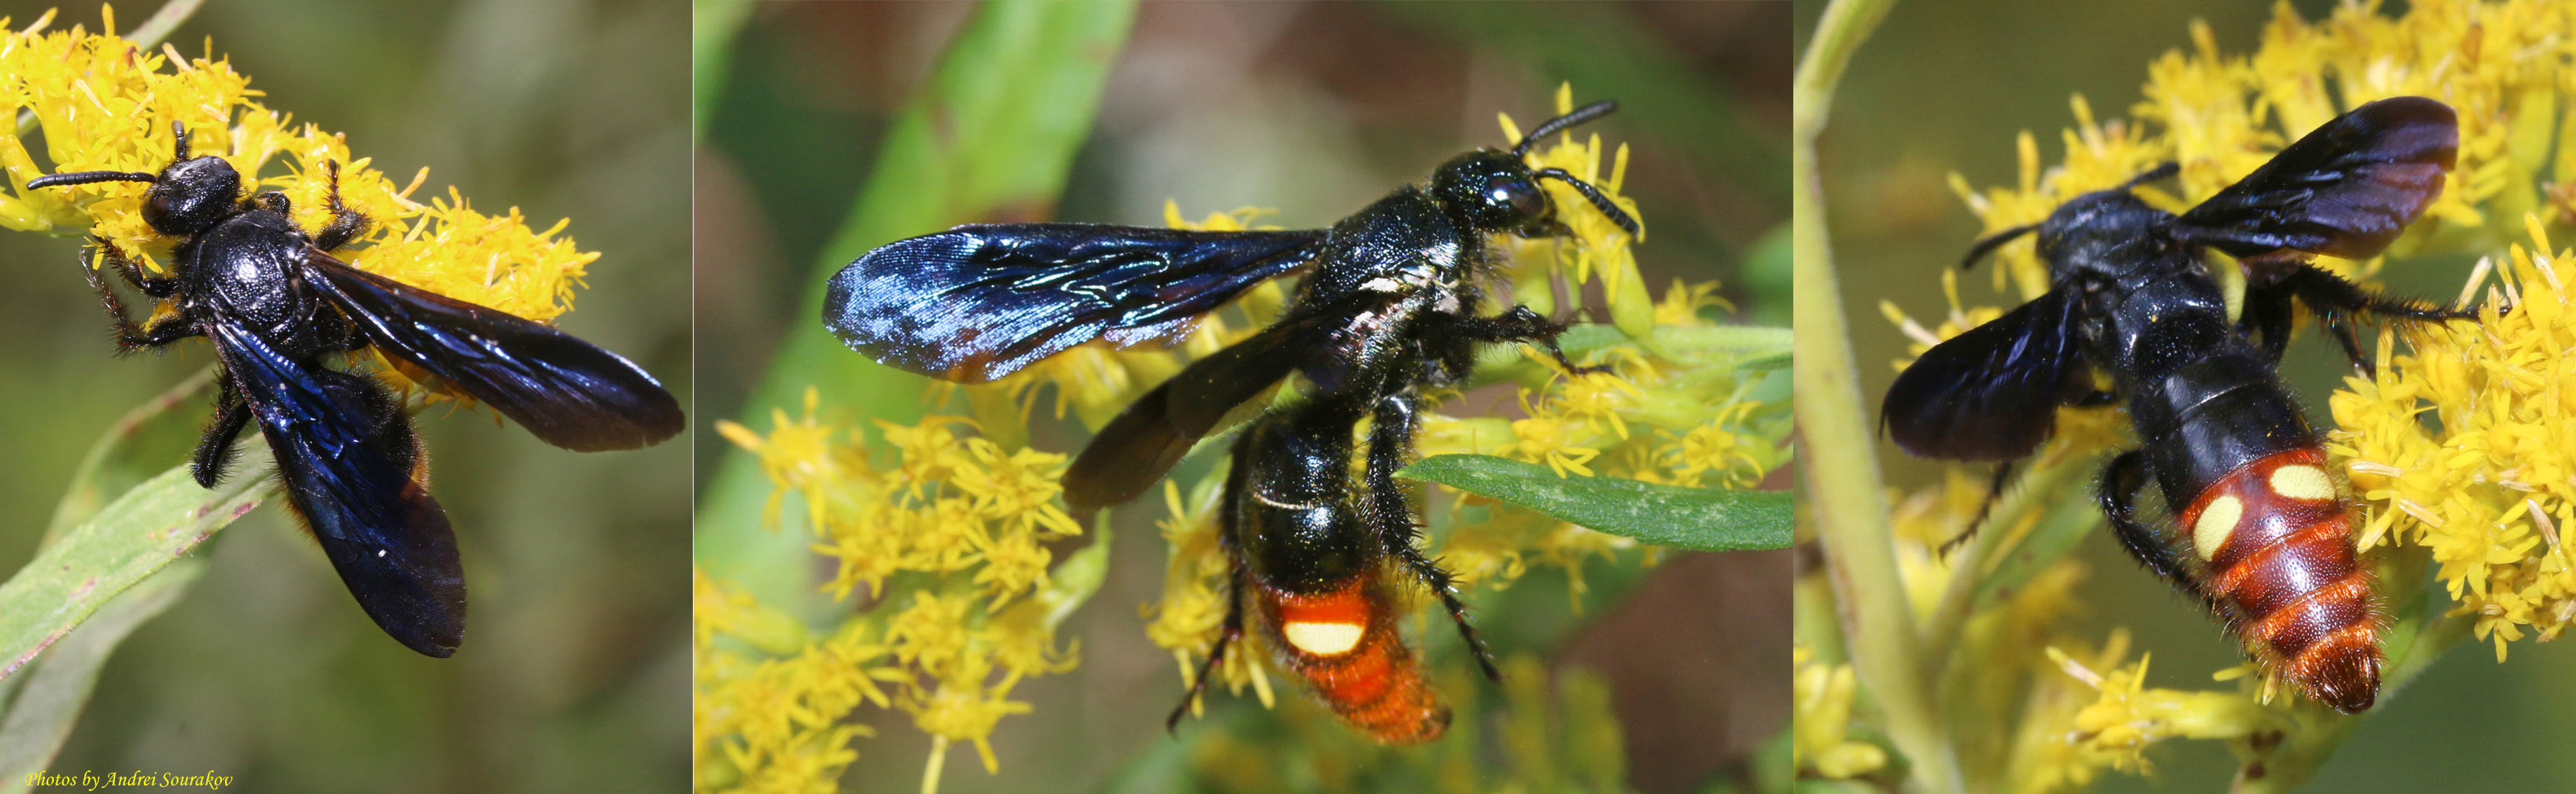 Triptych image of the Scoliid Wasp. Black ivory upper body and wings with an brown-orange abdomen